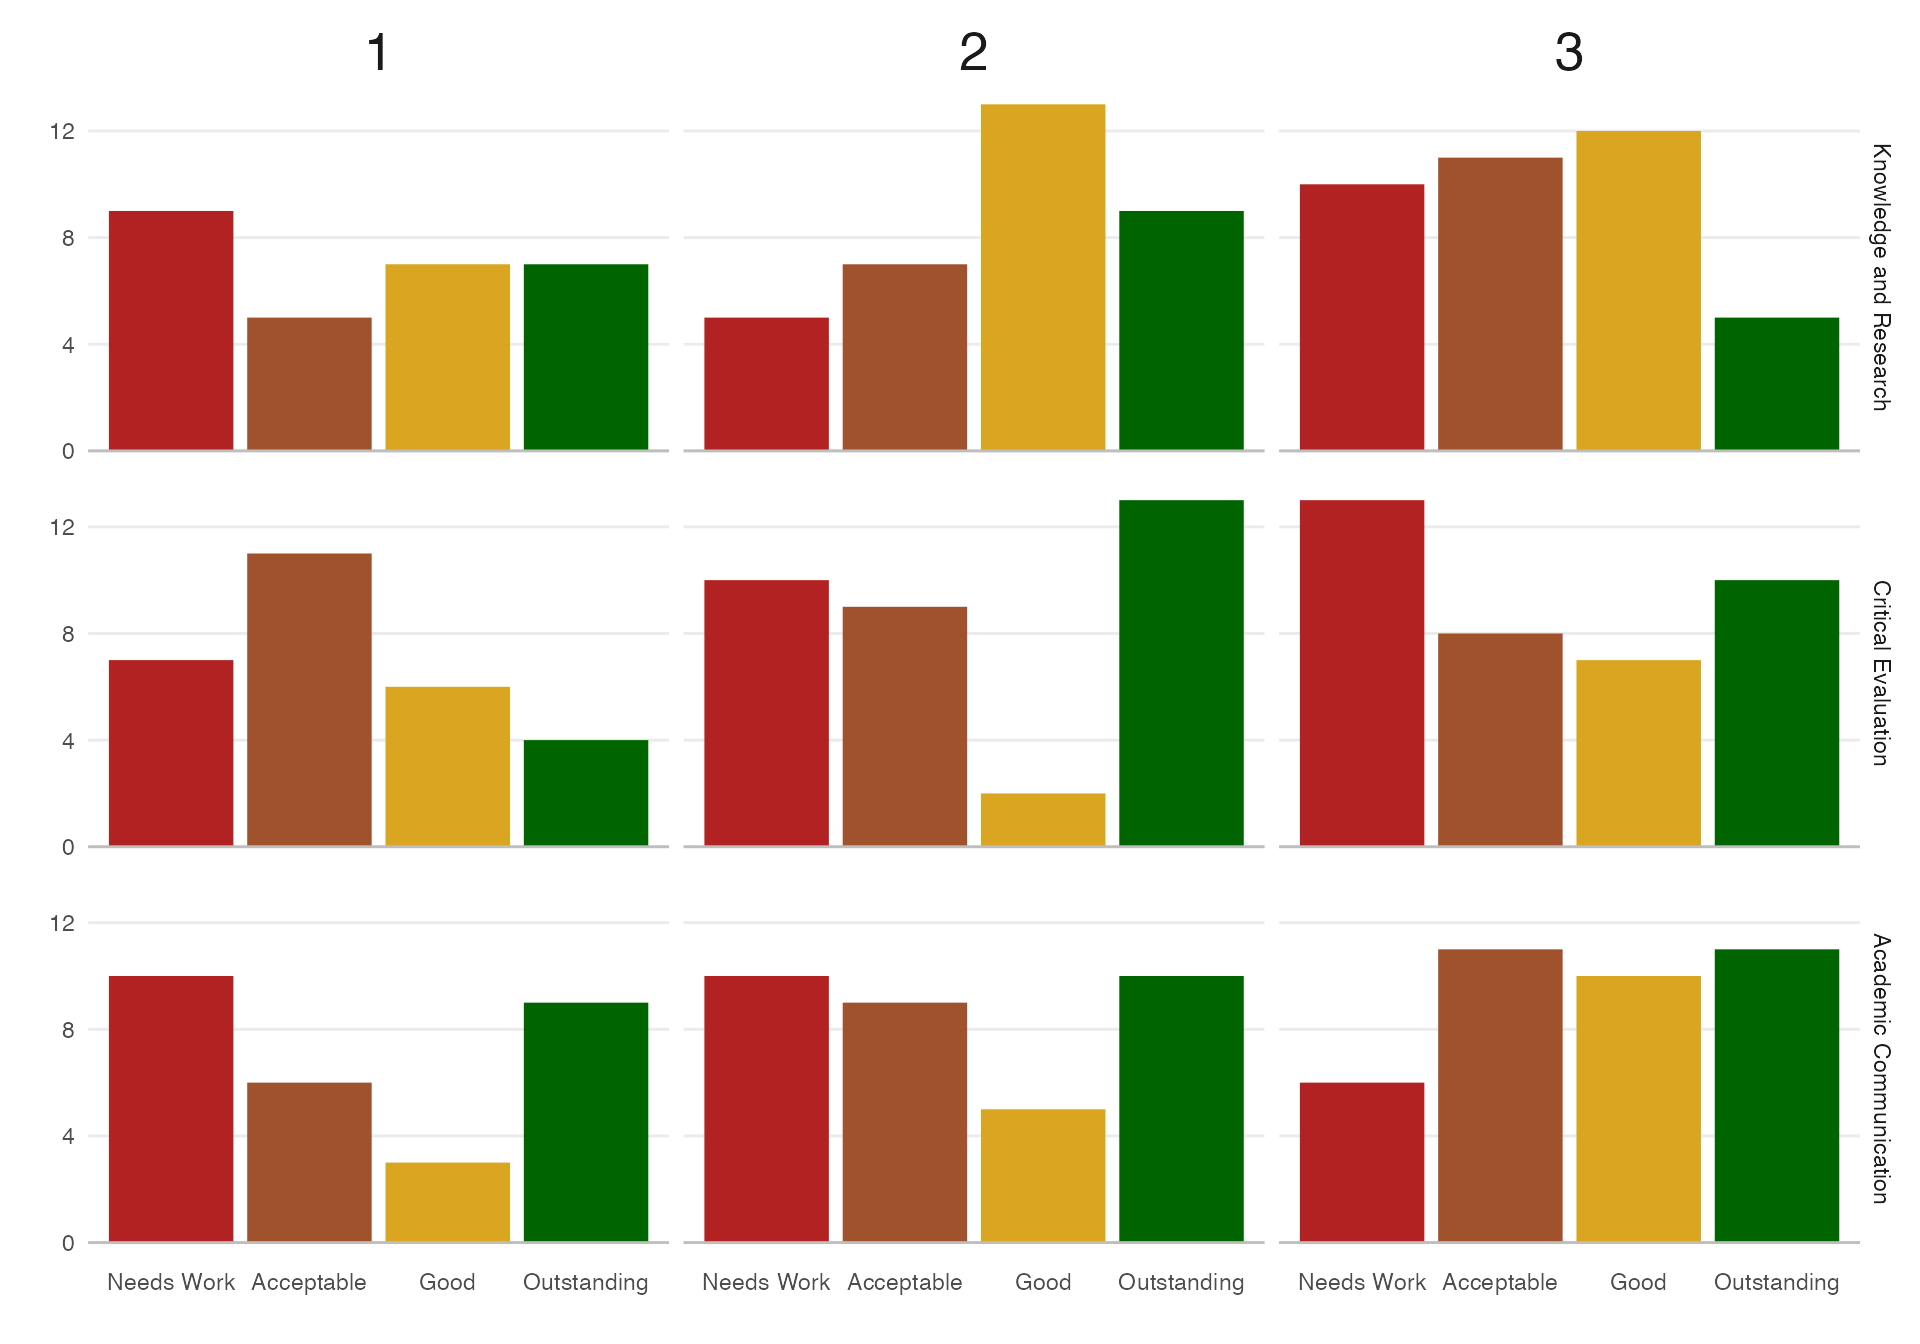 Plot of the distribution of the individual criteria for each question with a red, ornage and yellow colour scheme.